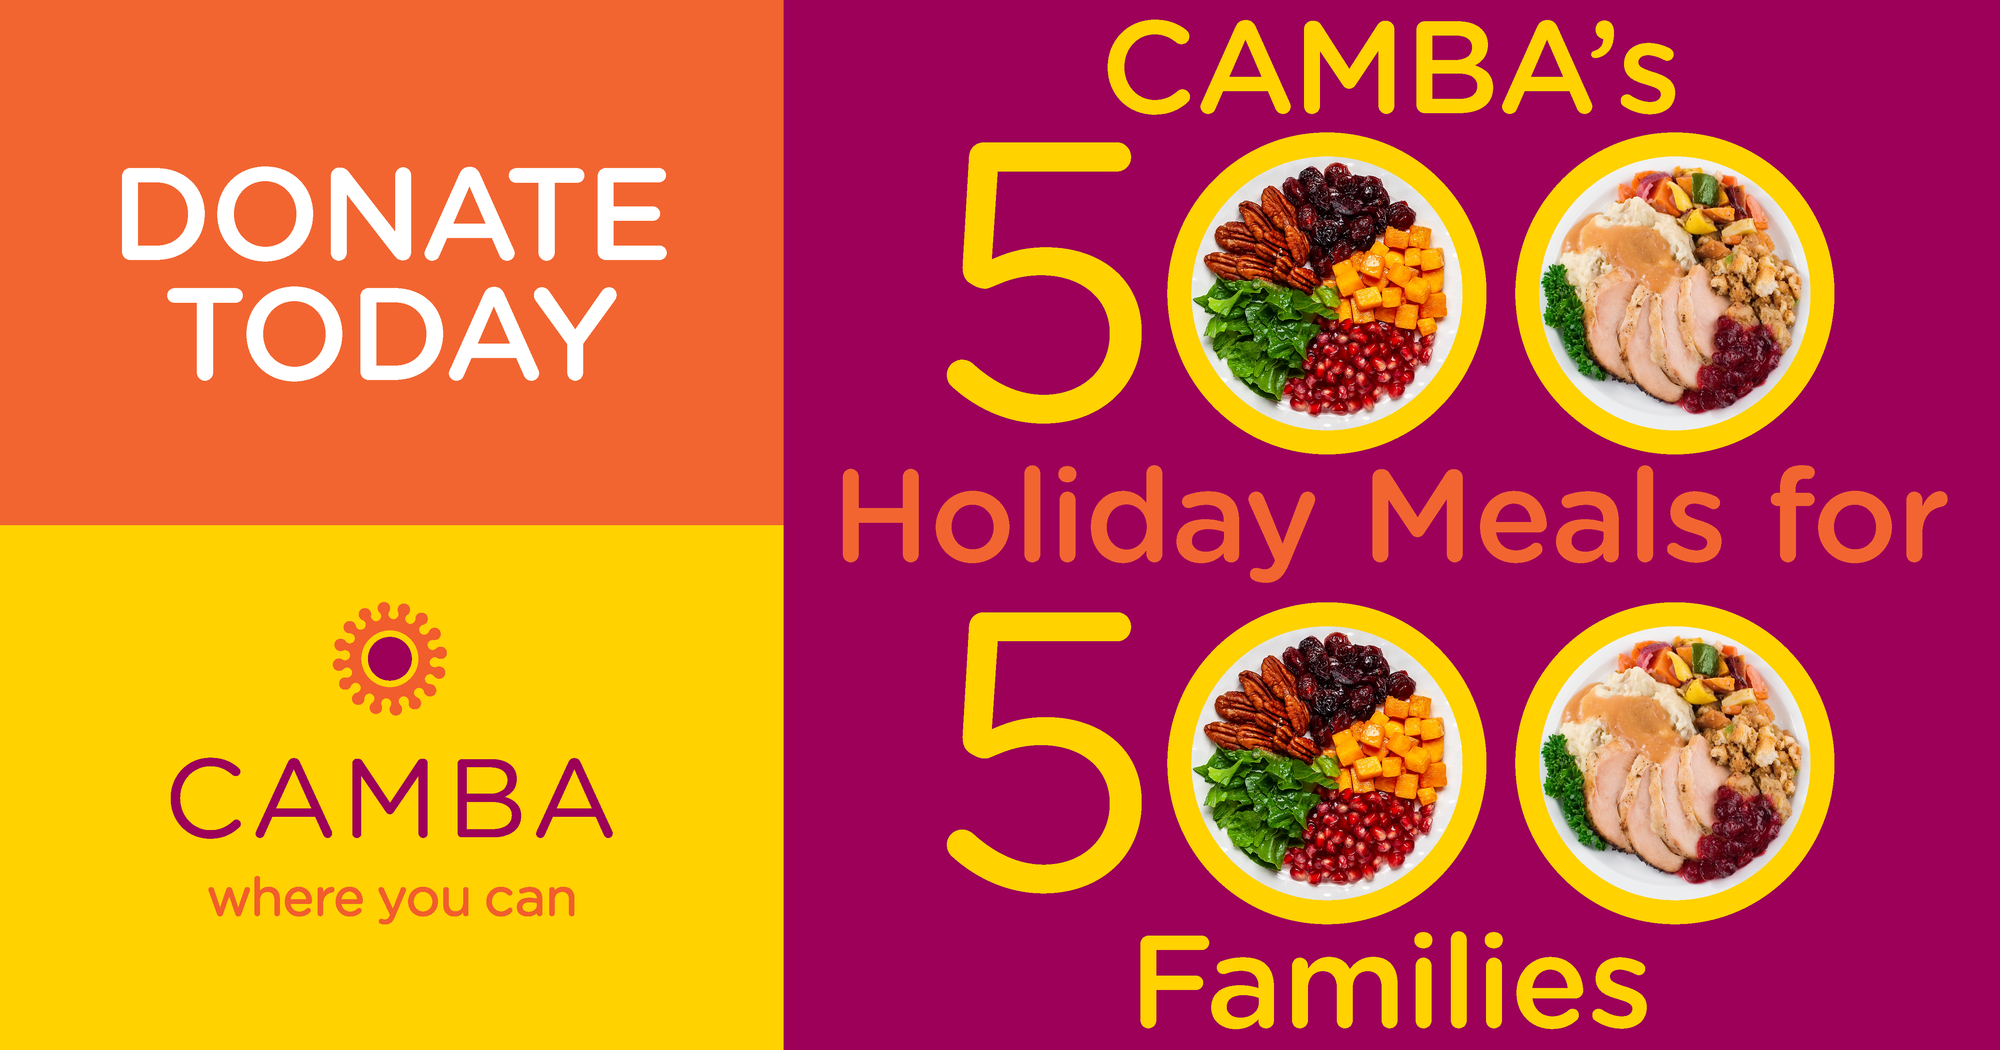 Help Us Provide 500 Meals For 500 Families This Thanksgiving!